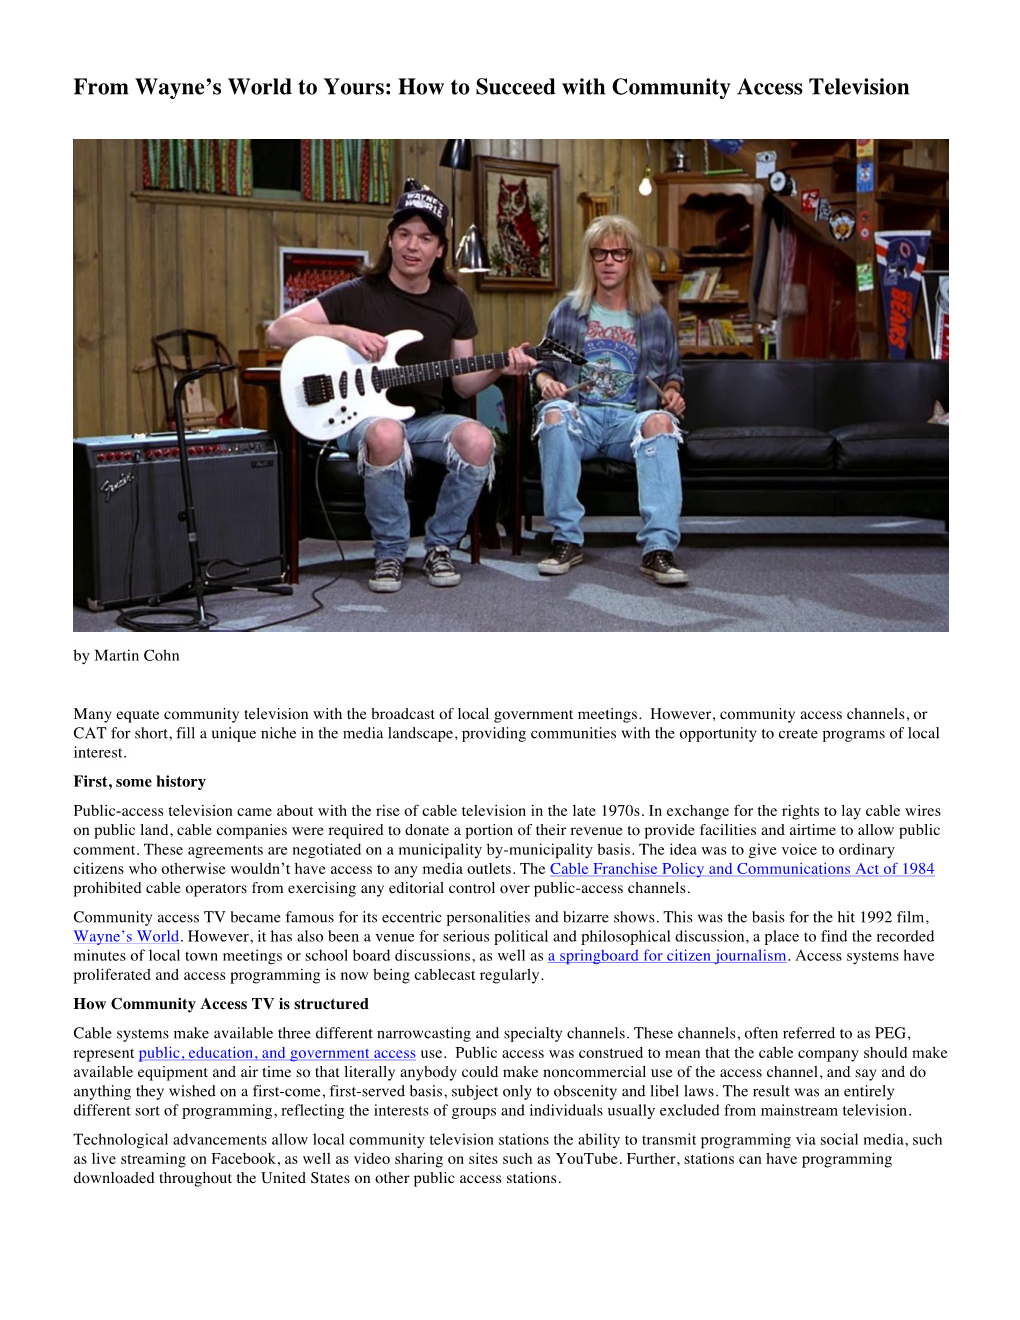 From Wayne's World to Yours: How to Succeed with Community Access Television